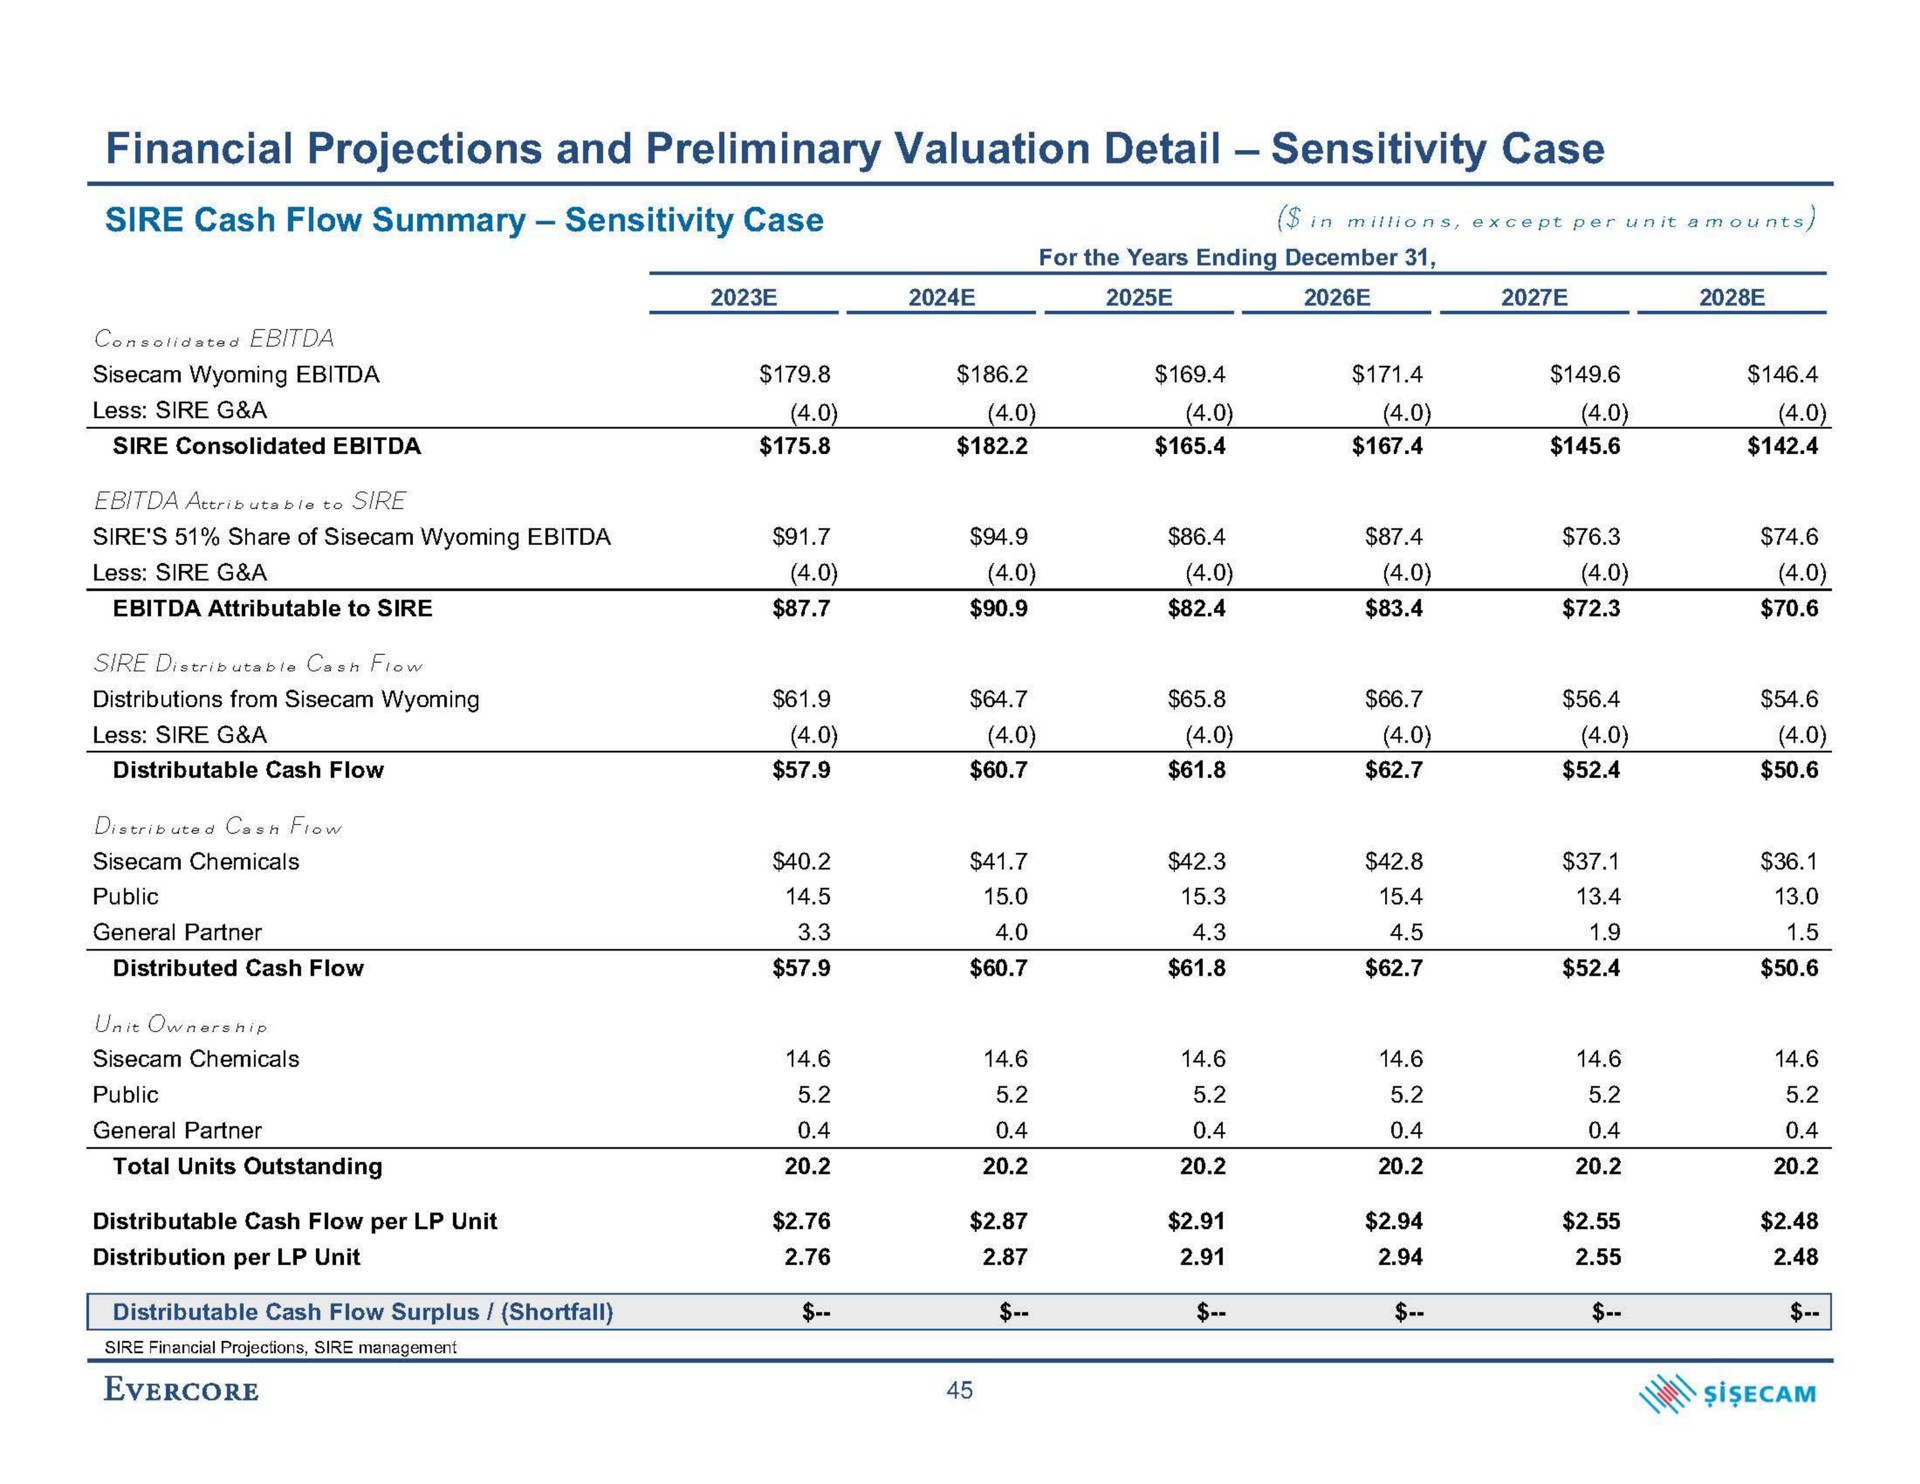 financial projections and preliminary valuation detail sensitivity case sire cash flow summary sensitivity case in except per unit amounts | Evercore